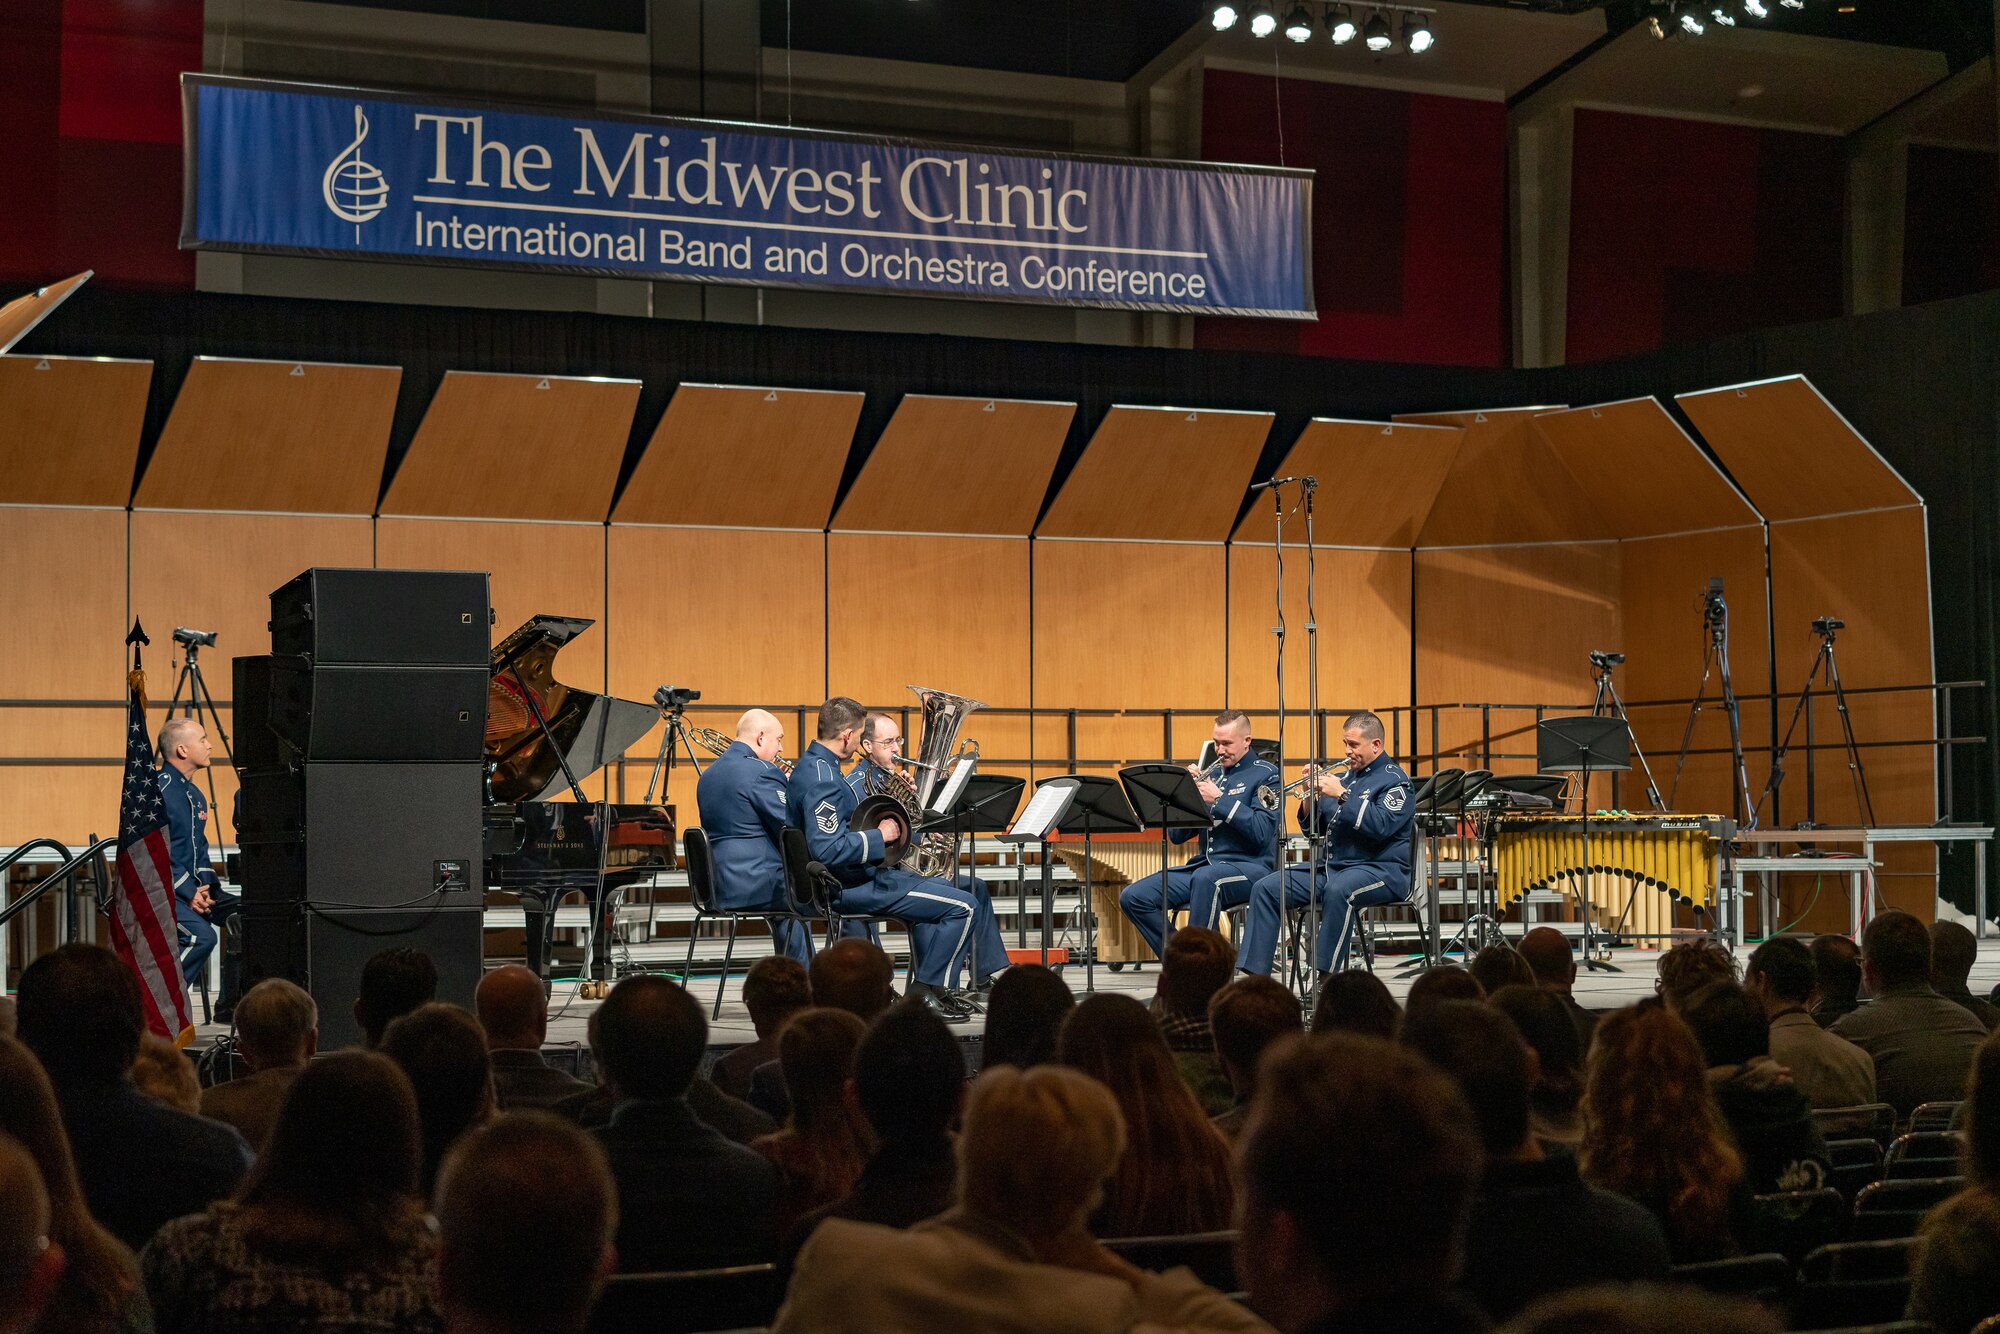 Instrumental musicians wearing the blue Air Force ceremonial uniform performing on a stage with a blue banner above which reads: The Midwest Clinic, International Band and Orchestra Conference. The backs of the heads of dozens of audience members is seen in the foreground, the bottom portion of the picture.